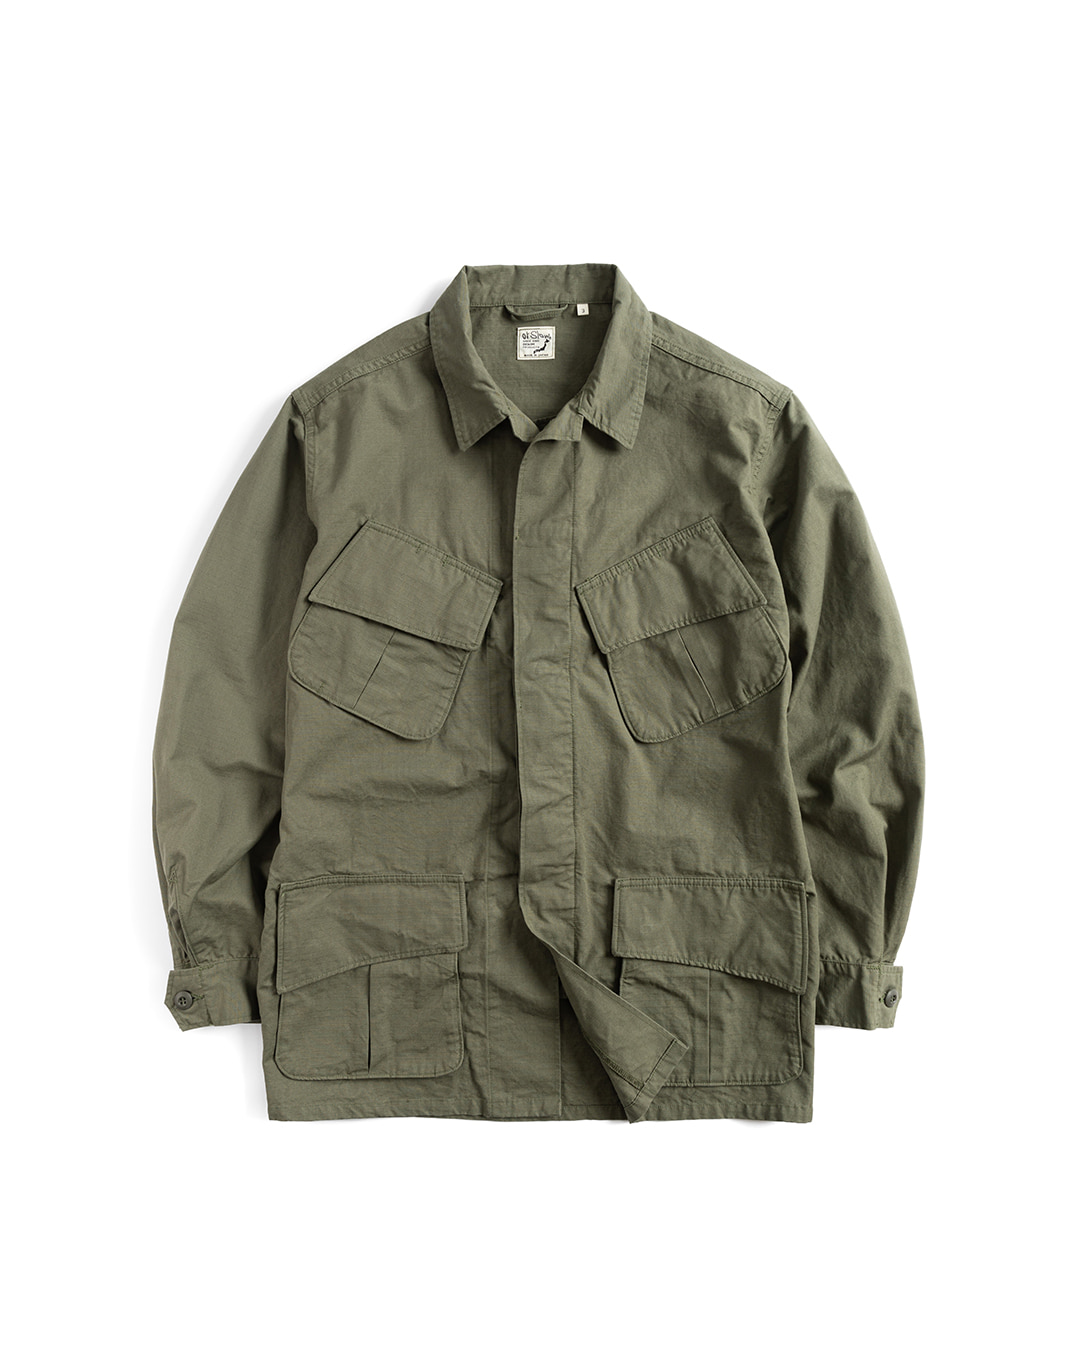 US ARMY TROPICAL JACKET (olive green)